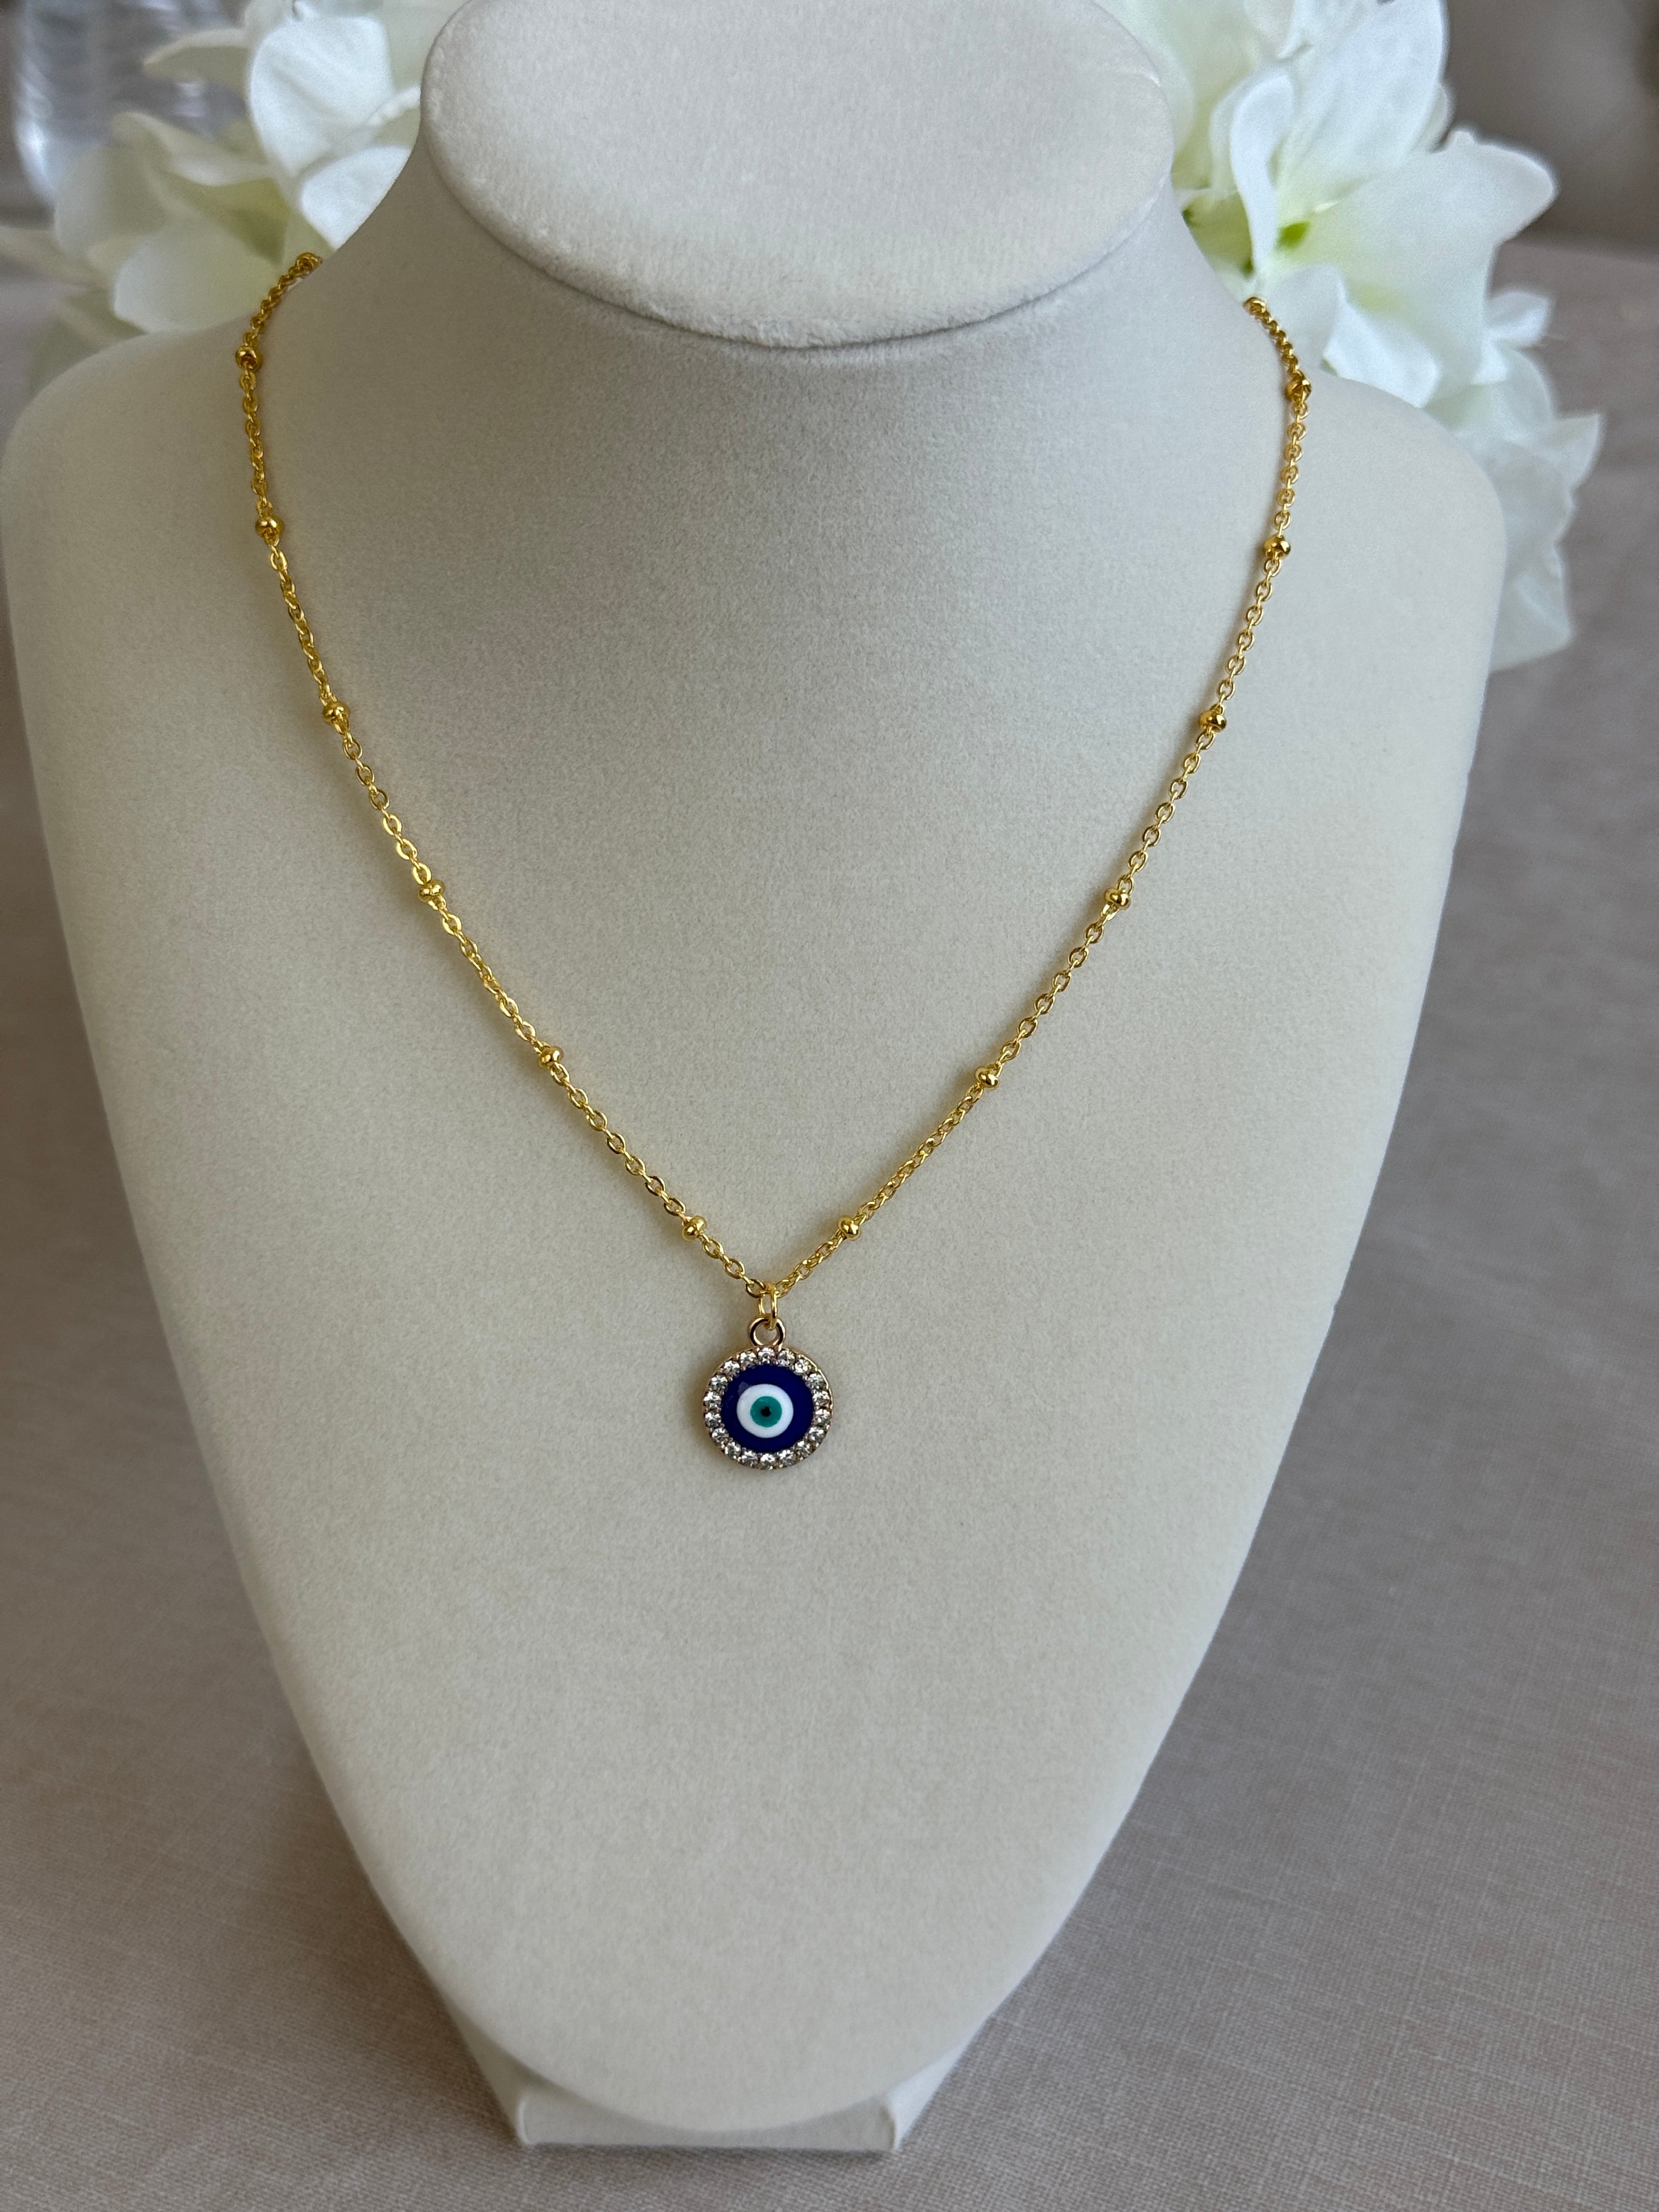 The Gold Evil Eye Necklace